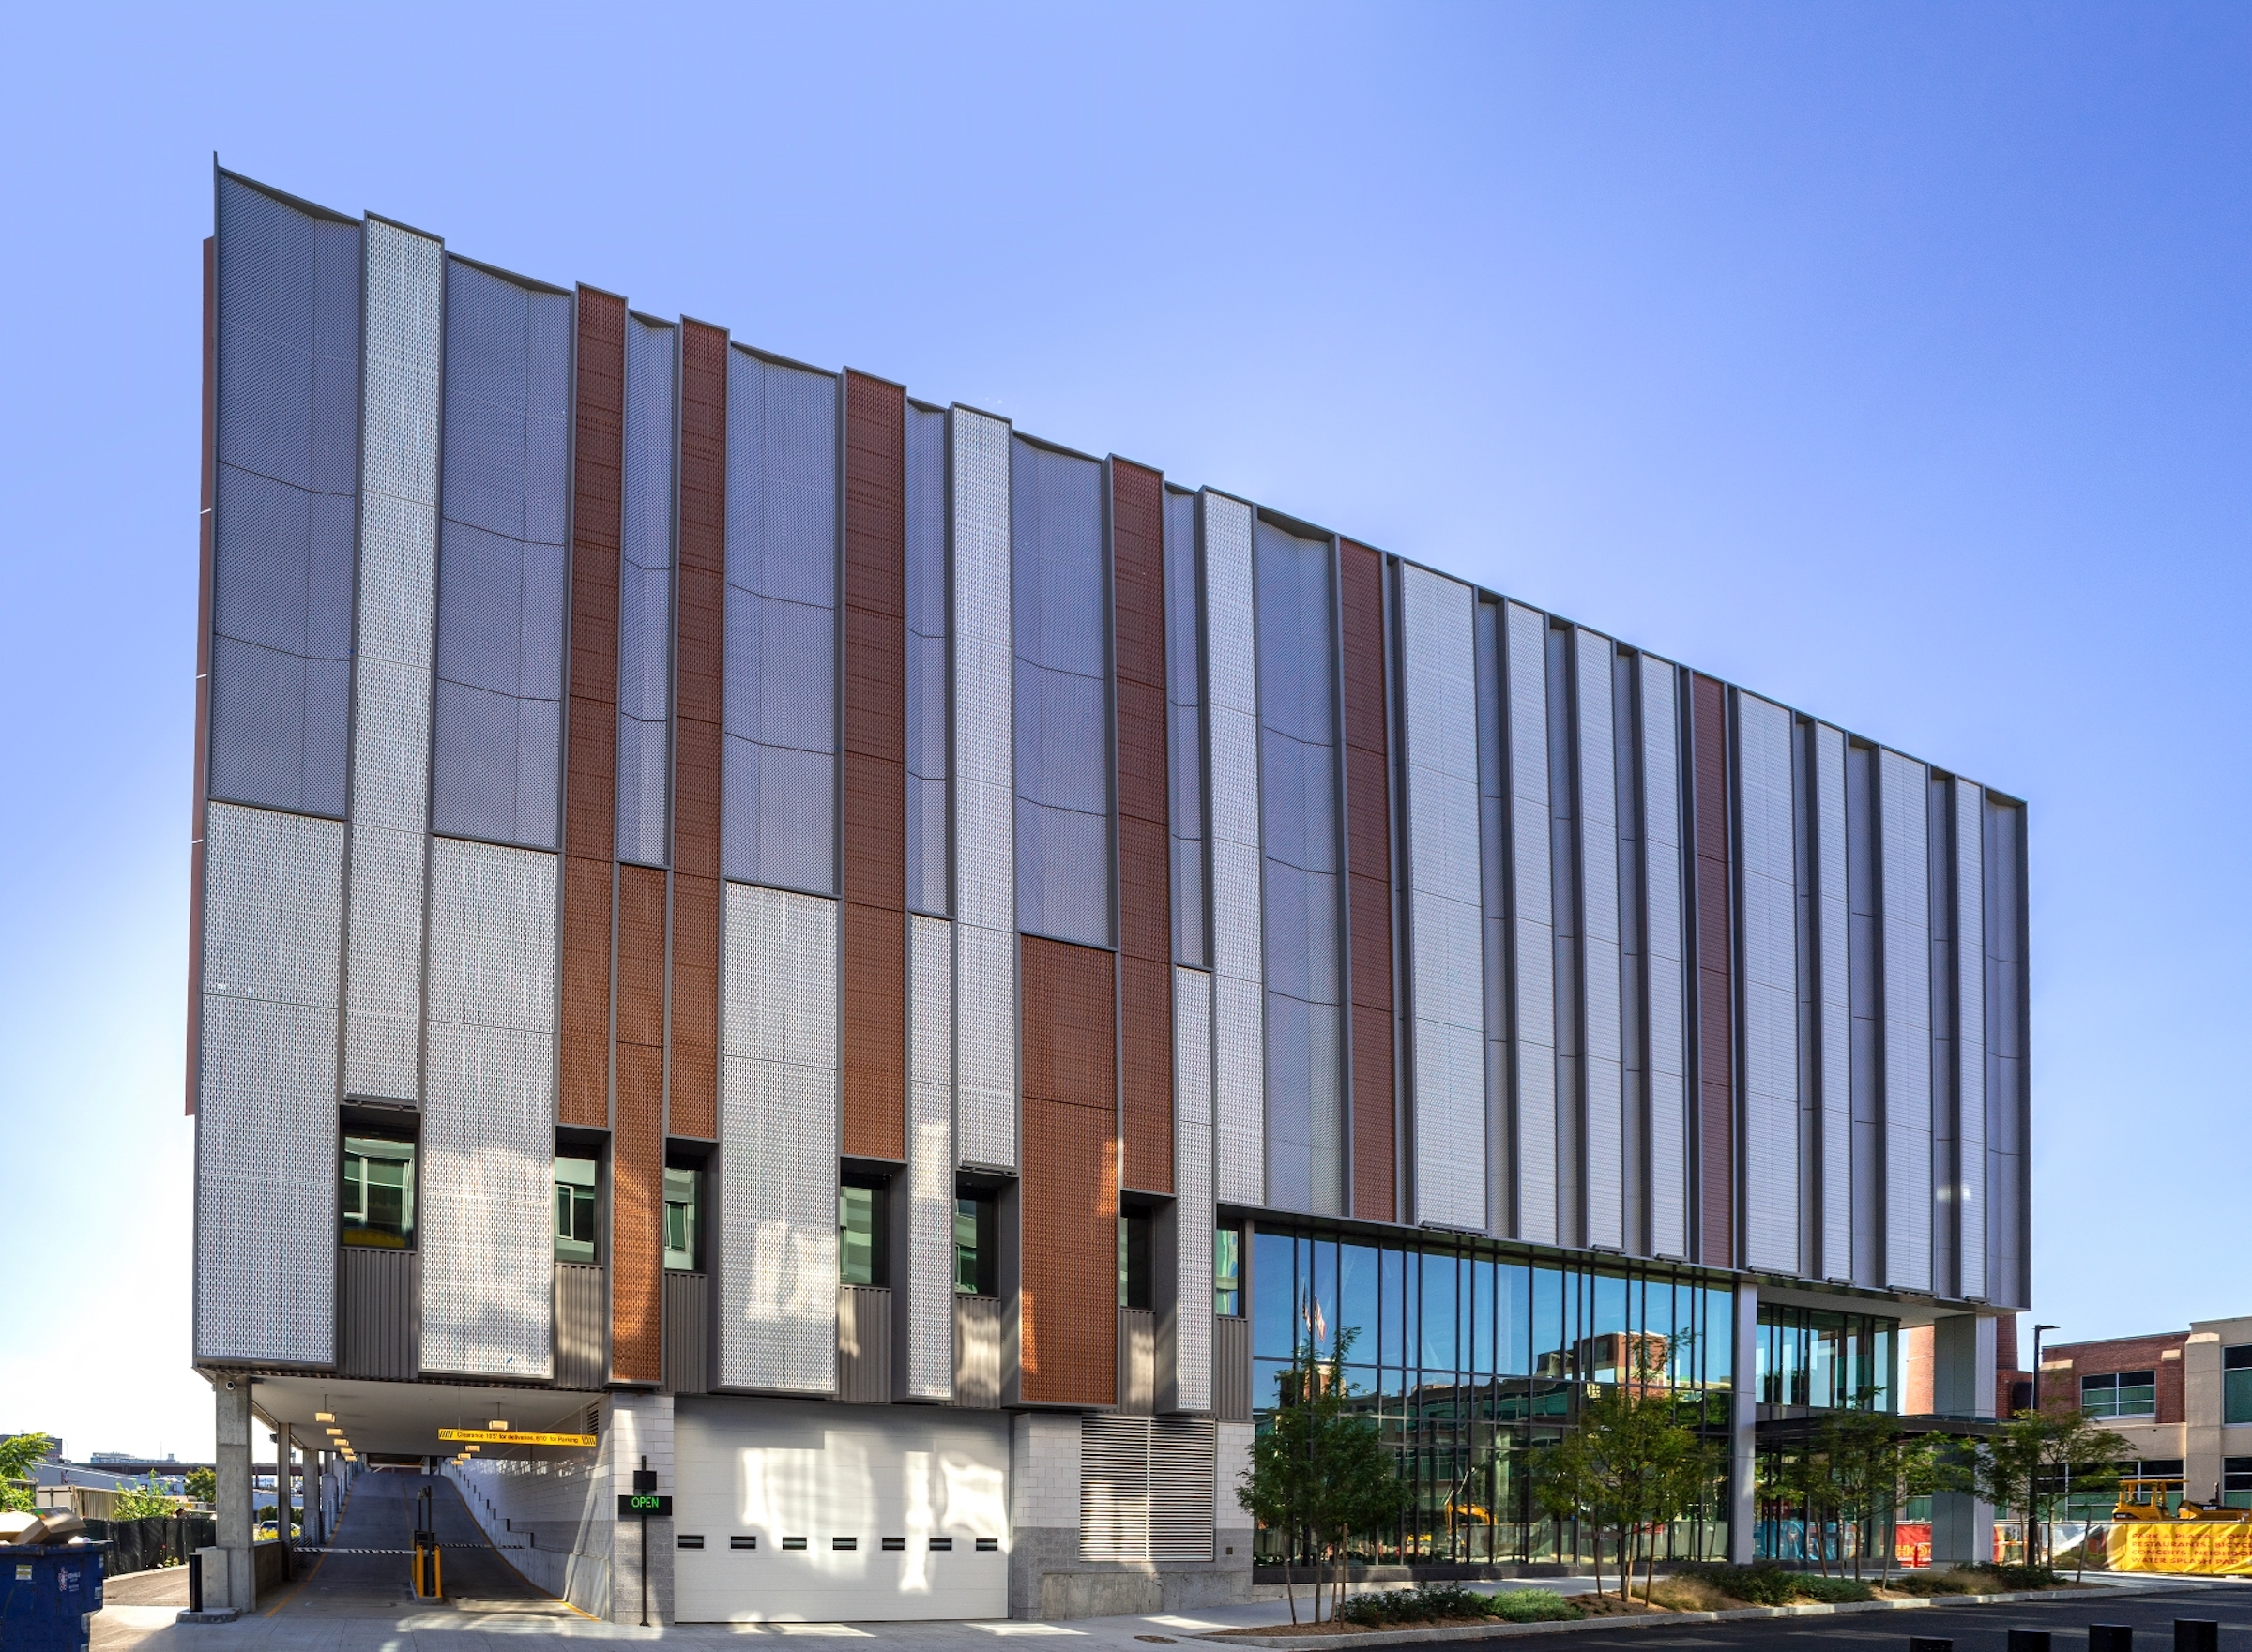 A new life sciences center at 100 Hood Park Drive in Charlestown., Mass., features varied metal cladding systems